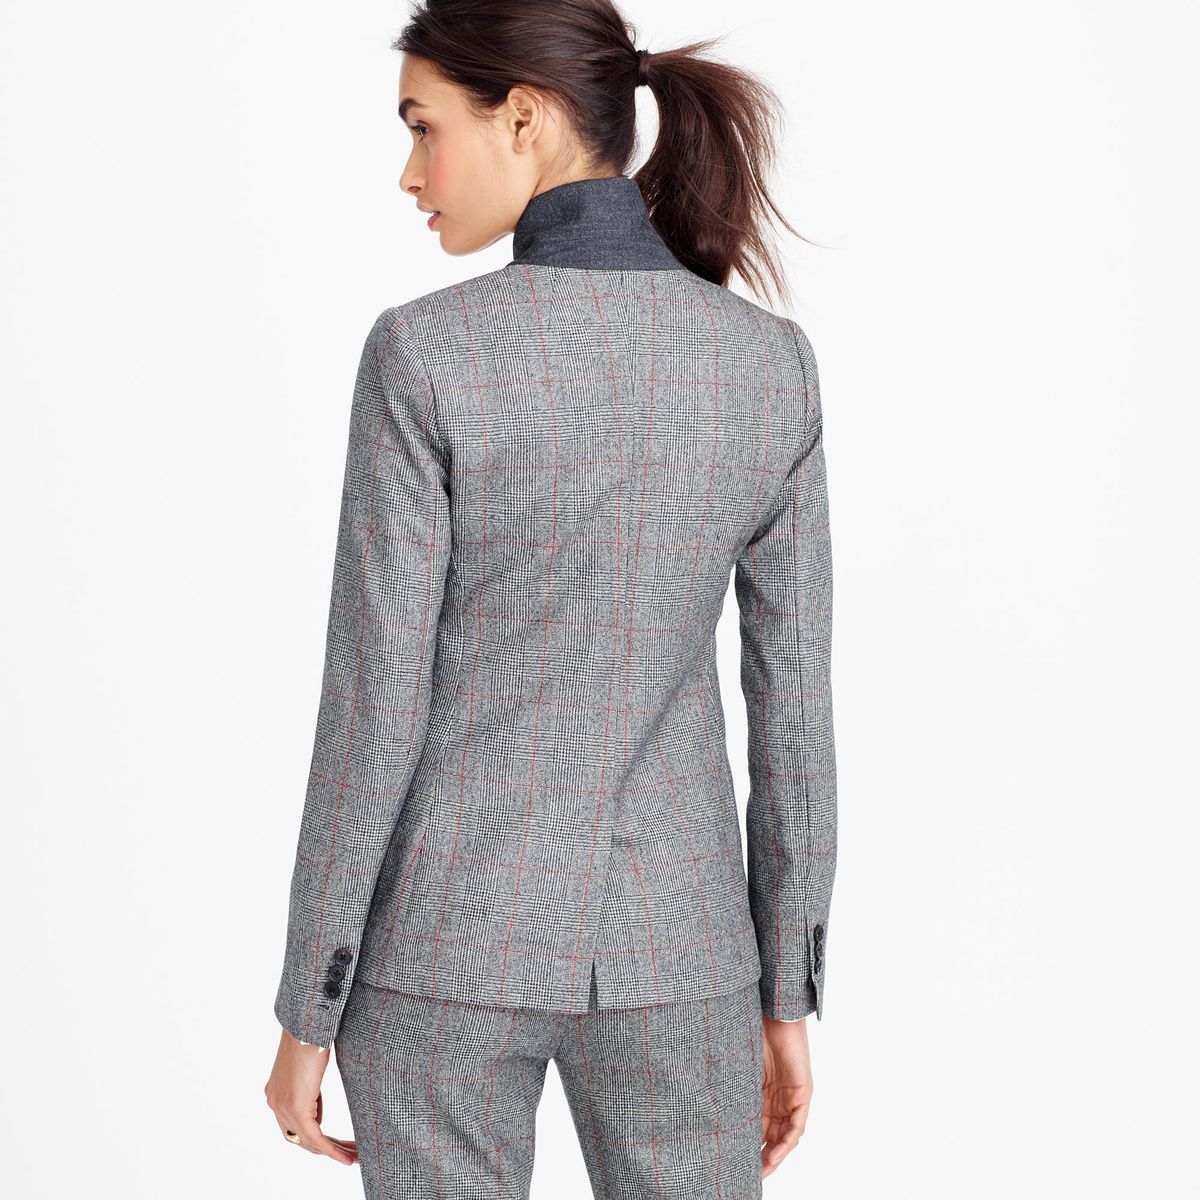 A JCrew gray suit shown from the back